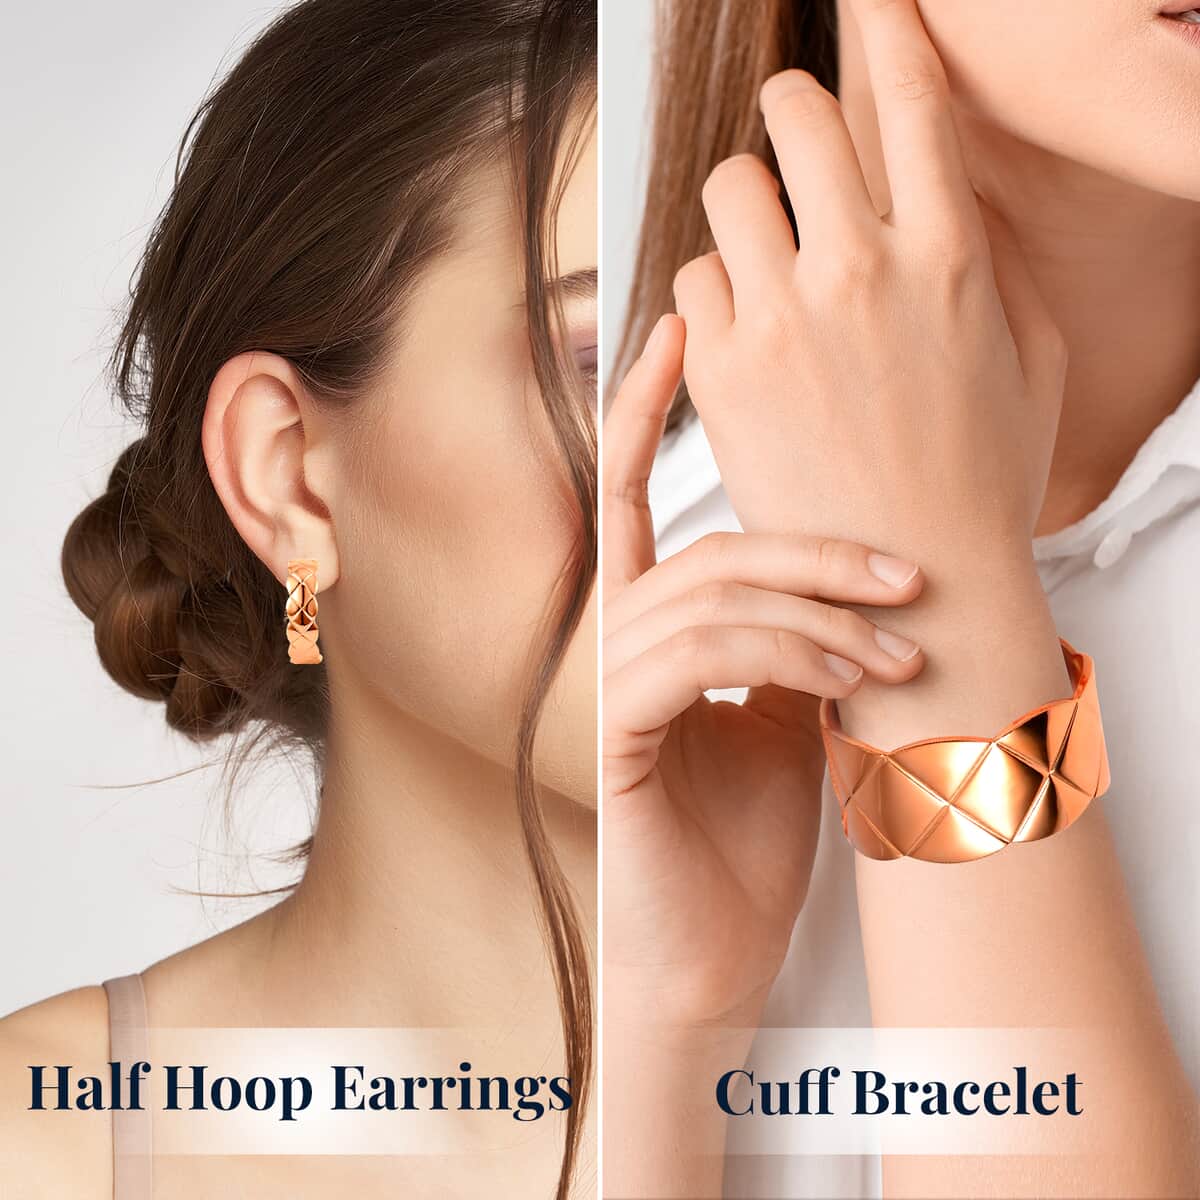 Ever True Diamond-cut Cuff Bracelet (7.0 In) and Half Hoop Earrings in ION Plated Rose Gold Stainless Steel, Jewelry Set, Birthday Gift For Her image number 4